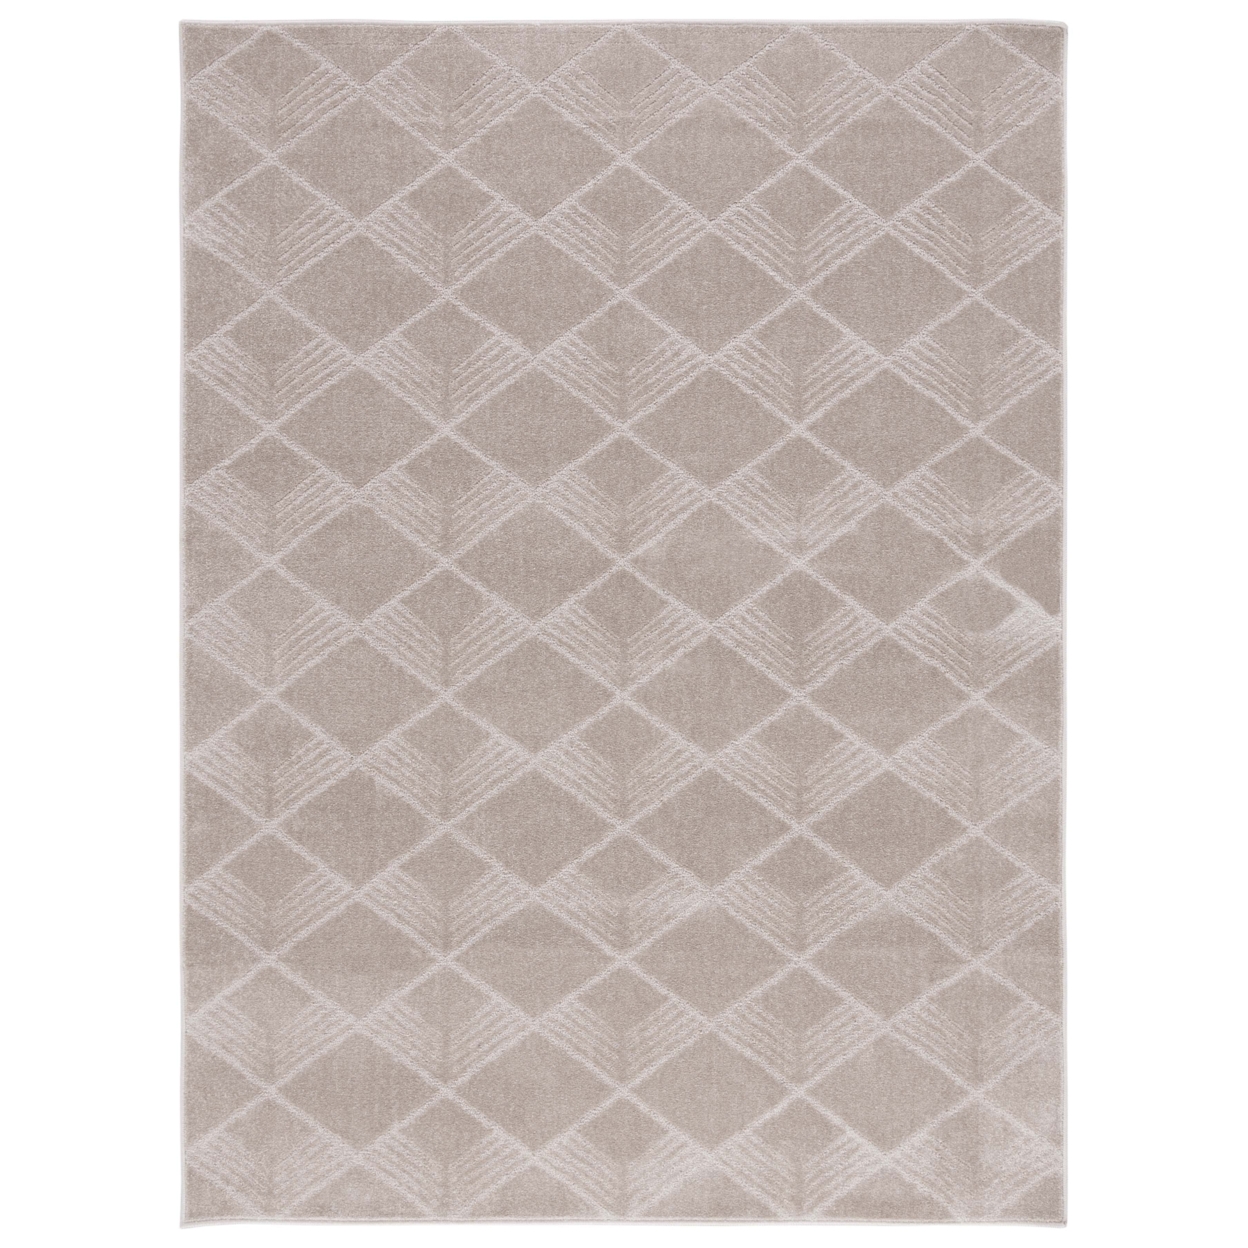 Safavieh PNS414B Pattern And Solid Beige - Silver / Ivory, 8' X 10' Rectangle